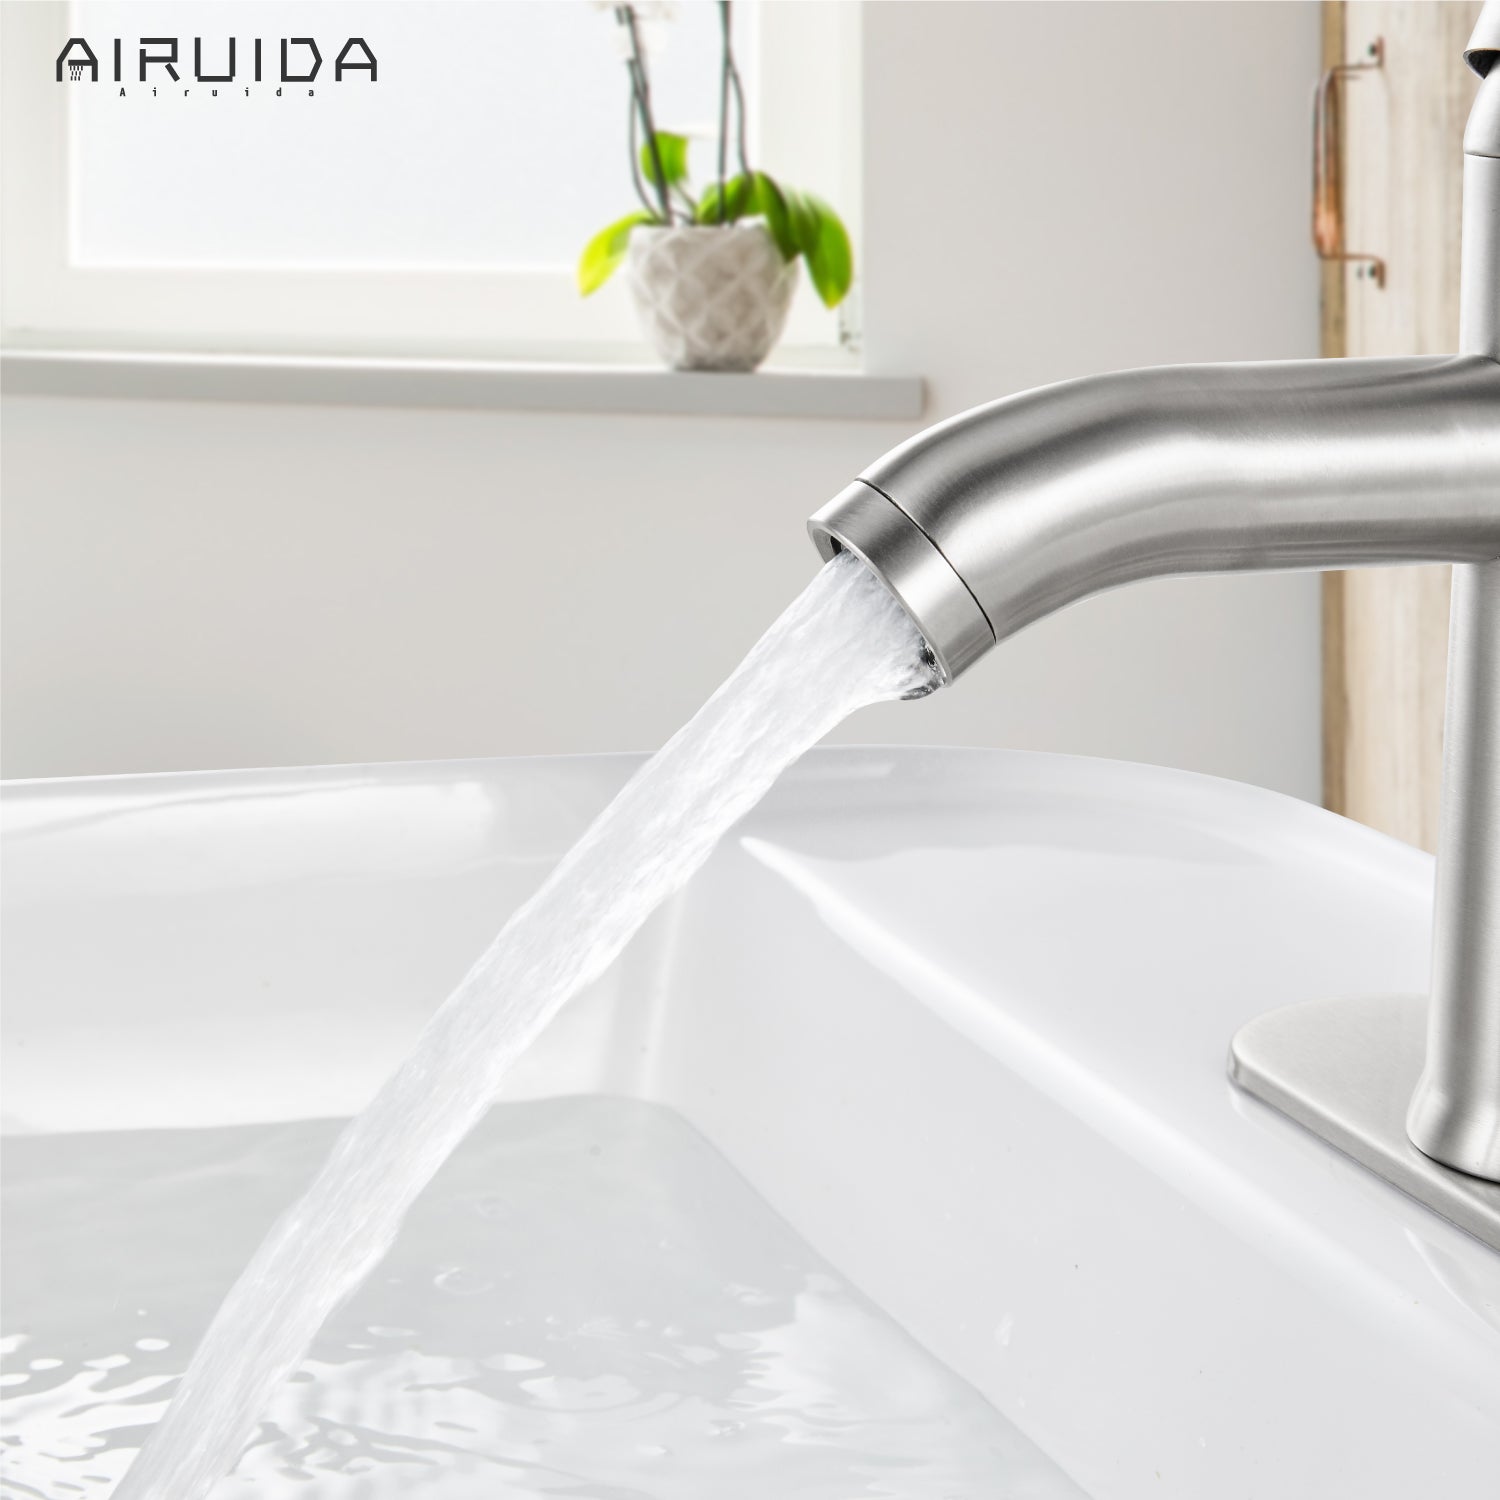 Airuida Short Bathroom Bowl Vessel Sink Faucet Bathroom Stainless Steel Mixer Tap Single Handle Single Hole Deck Mount with Circular Spout Bowl Vanity Faucets